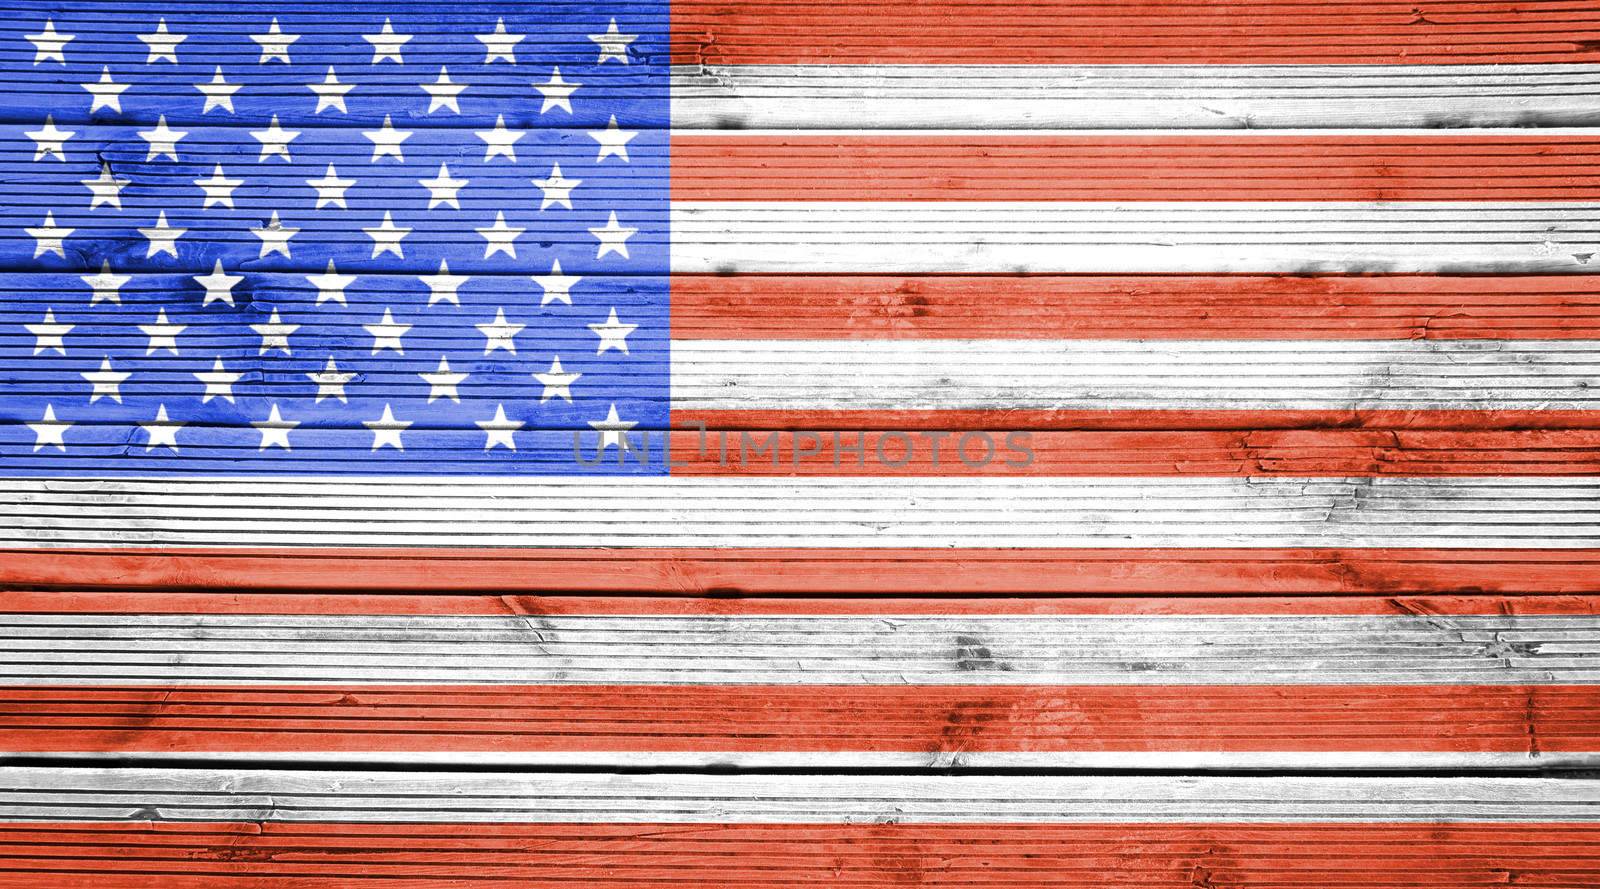 Natural wood planks texture background with the colors of the flag of United States